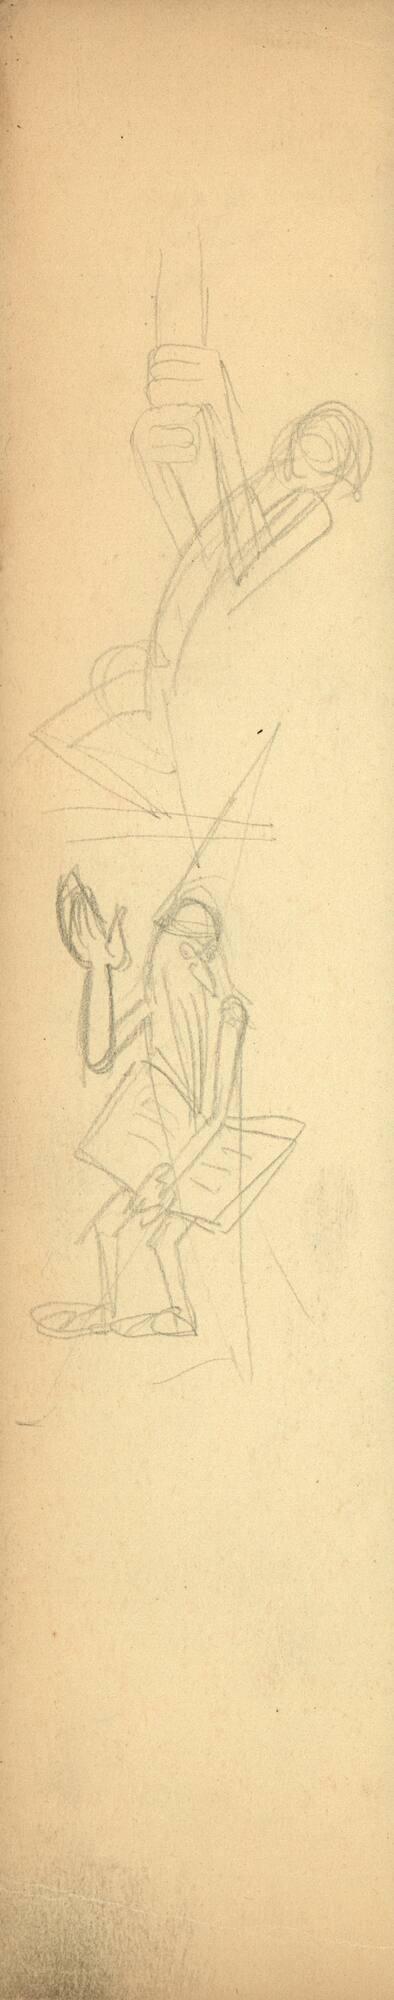 (63)  untitled [sketch, figures, one is carrying an open book]